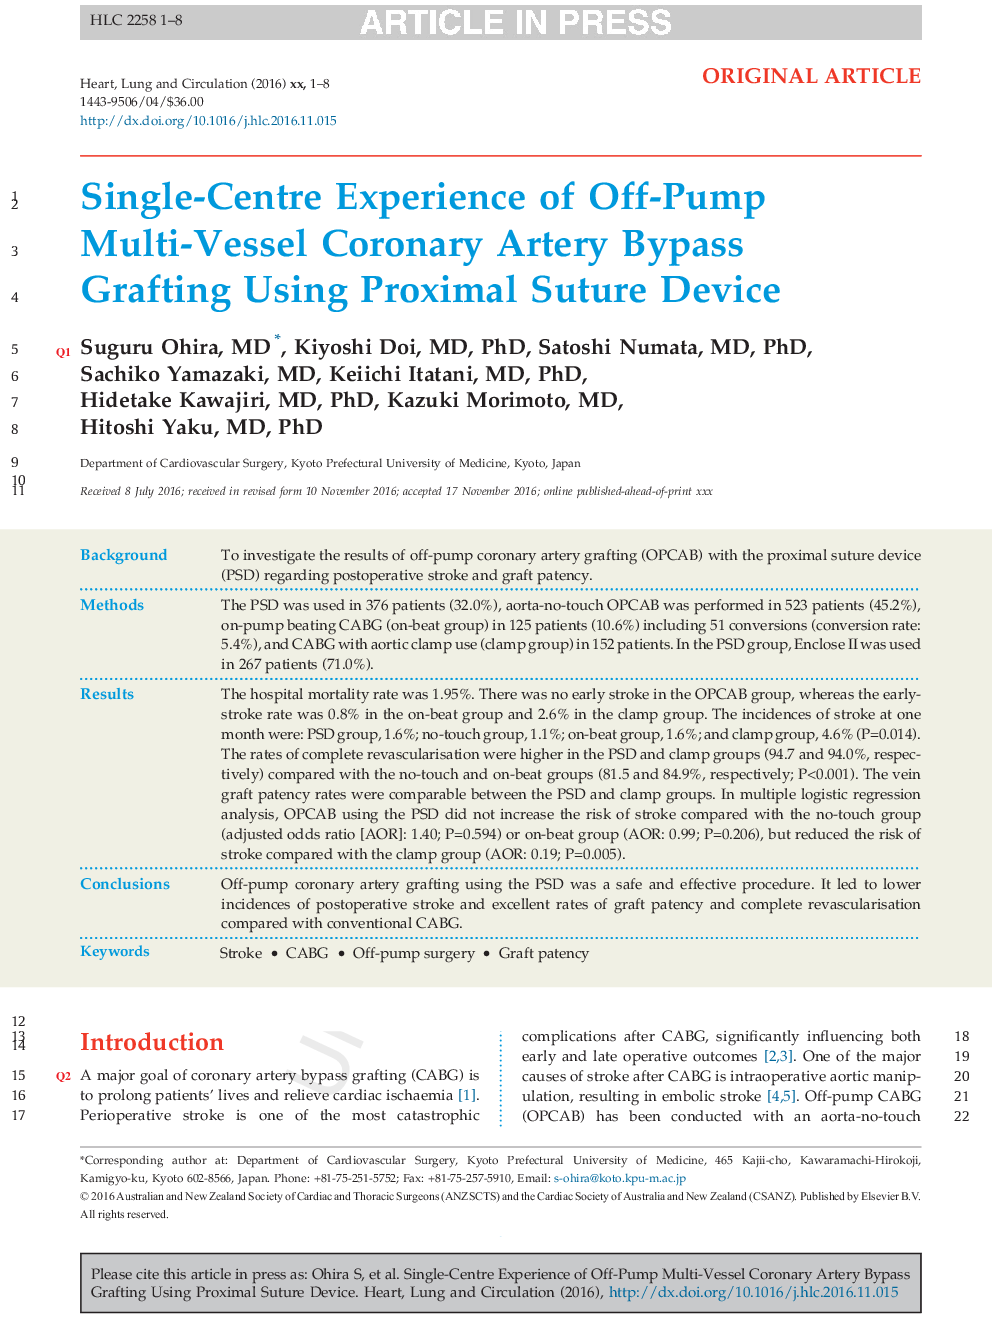 Single-Centre Experience of Off-Pump Multi-Vessel Coronary Artery Bypass Grafting Using Proximal Suture Device